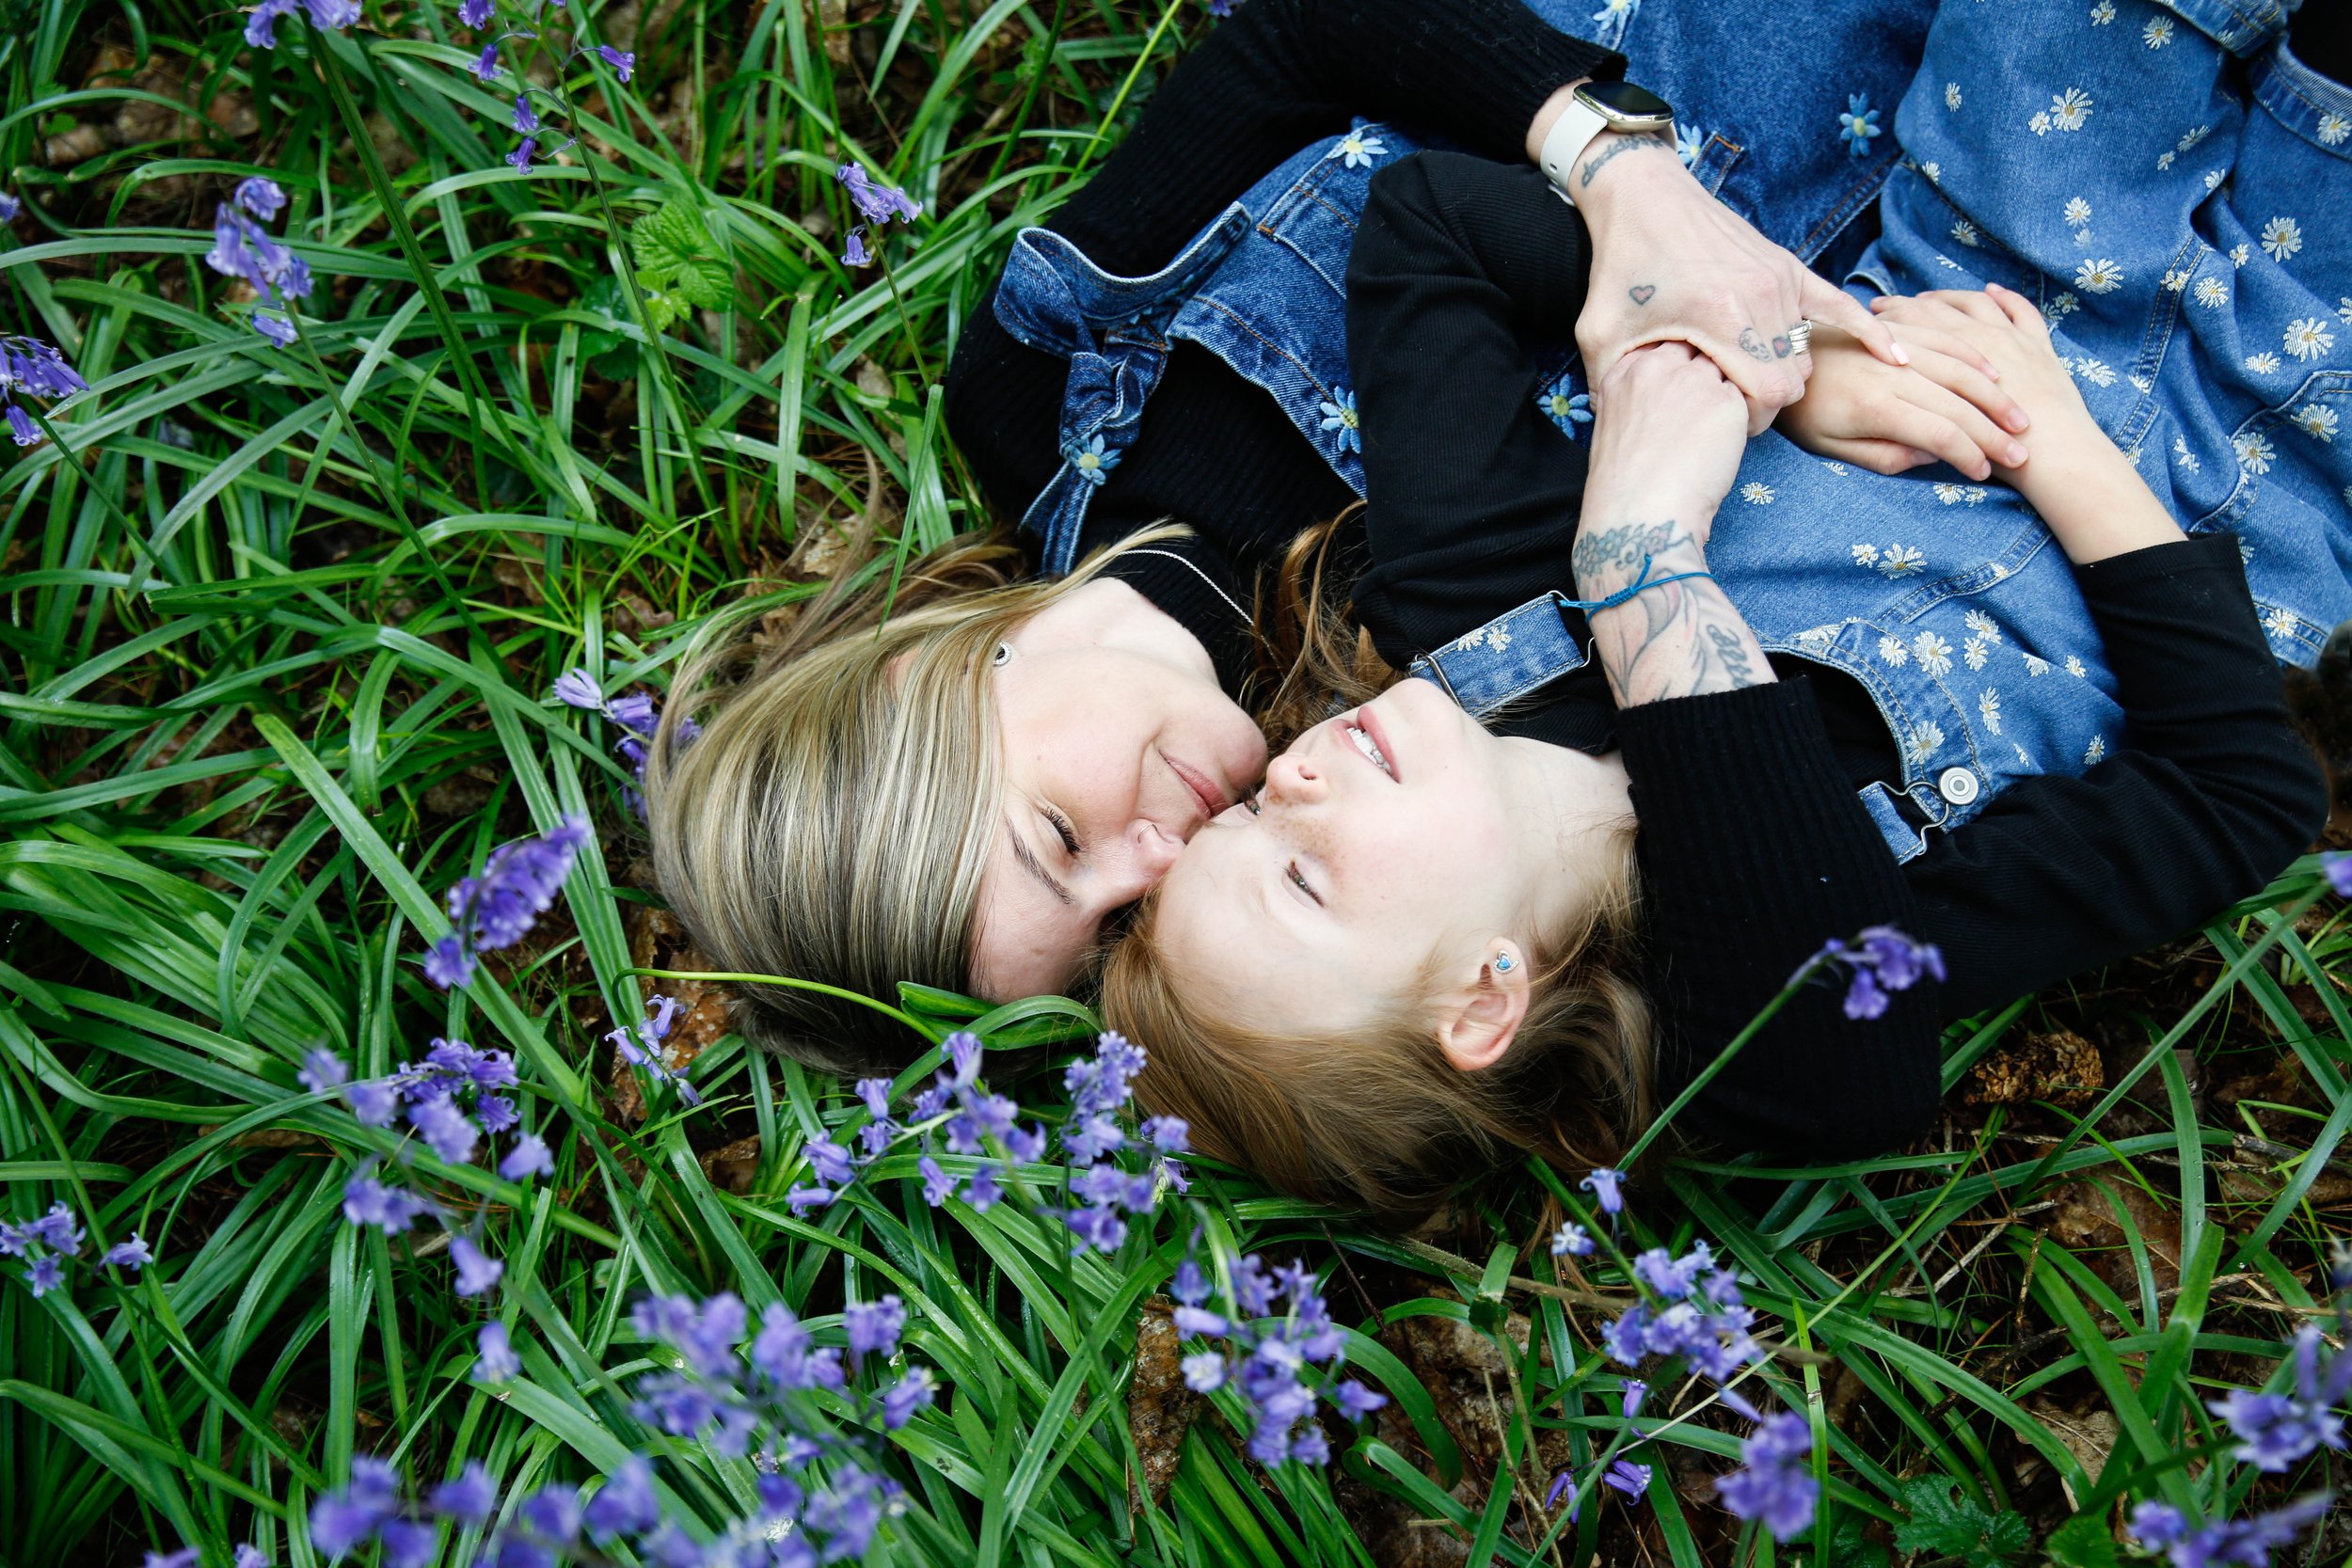 MUM AND DAUGHTER PHOTO SHOOT IN THE BLUEBELLS | BERKSHIRE PORTRAIT SHOOTS18 choice .JPG